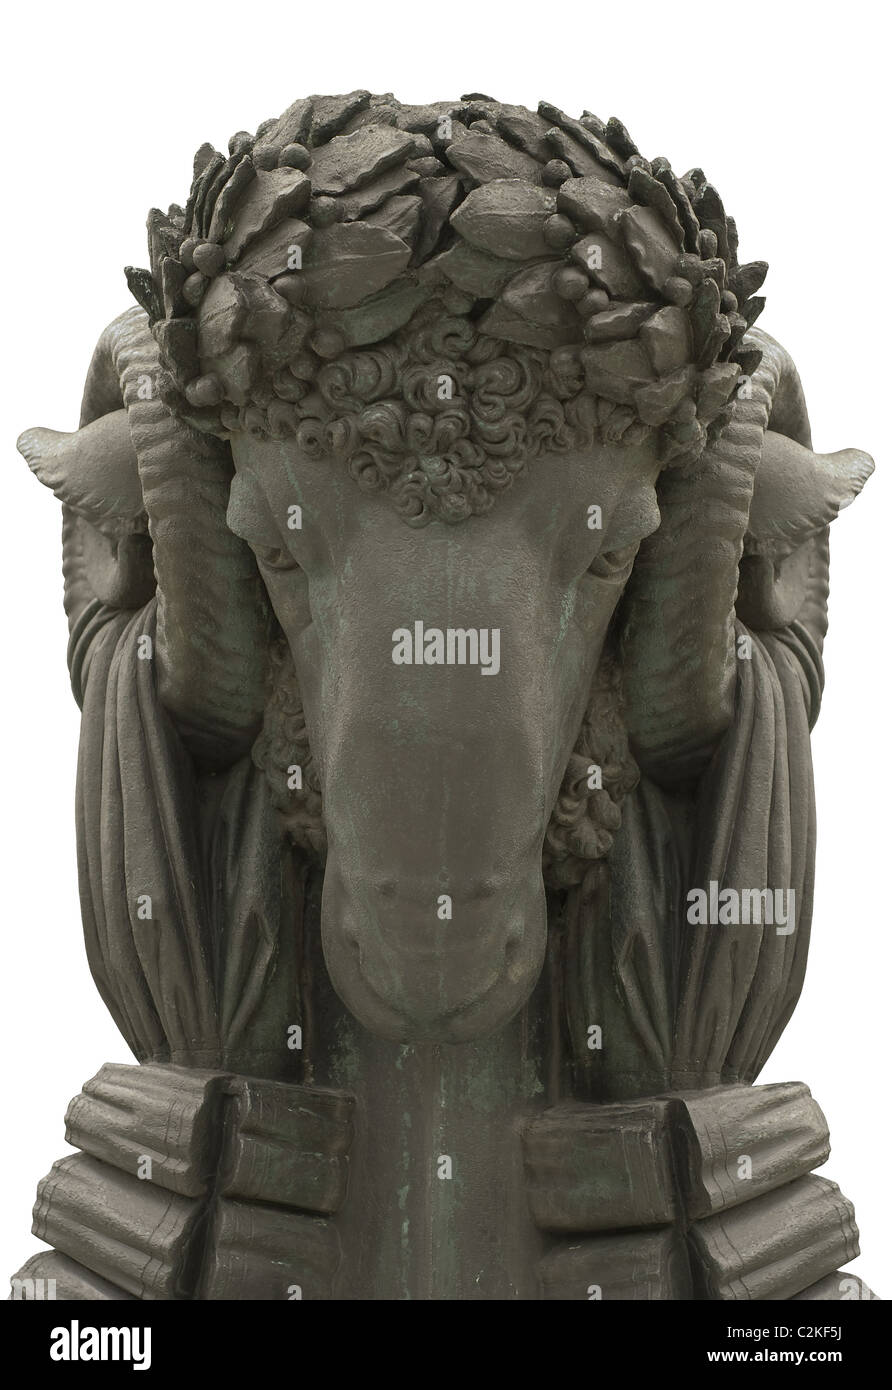 Bronze Monument of Ram on White for Easy Cut Out Stock Photo